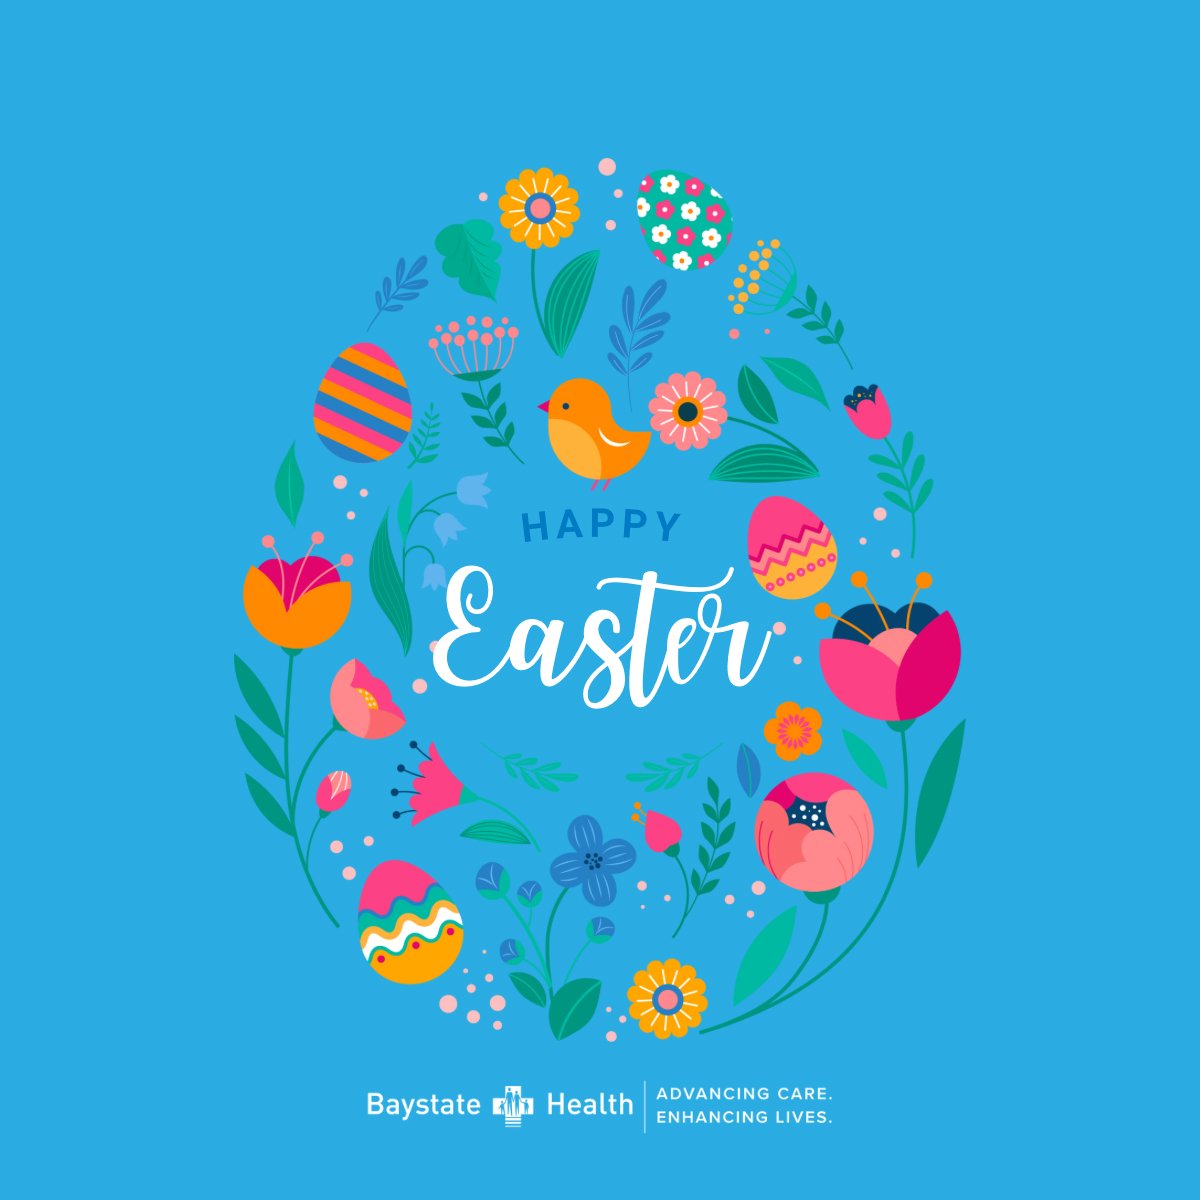 🐰🌷 Wishing you and your loved ones a joy-filled Easter! May you have an egg-ceptional day filled with love, laughter, and all things wonderful! 🐣